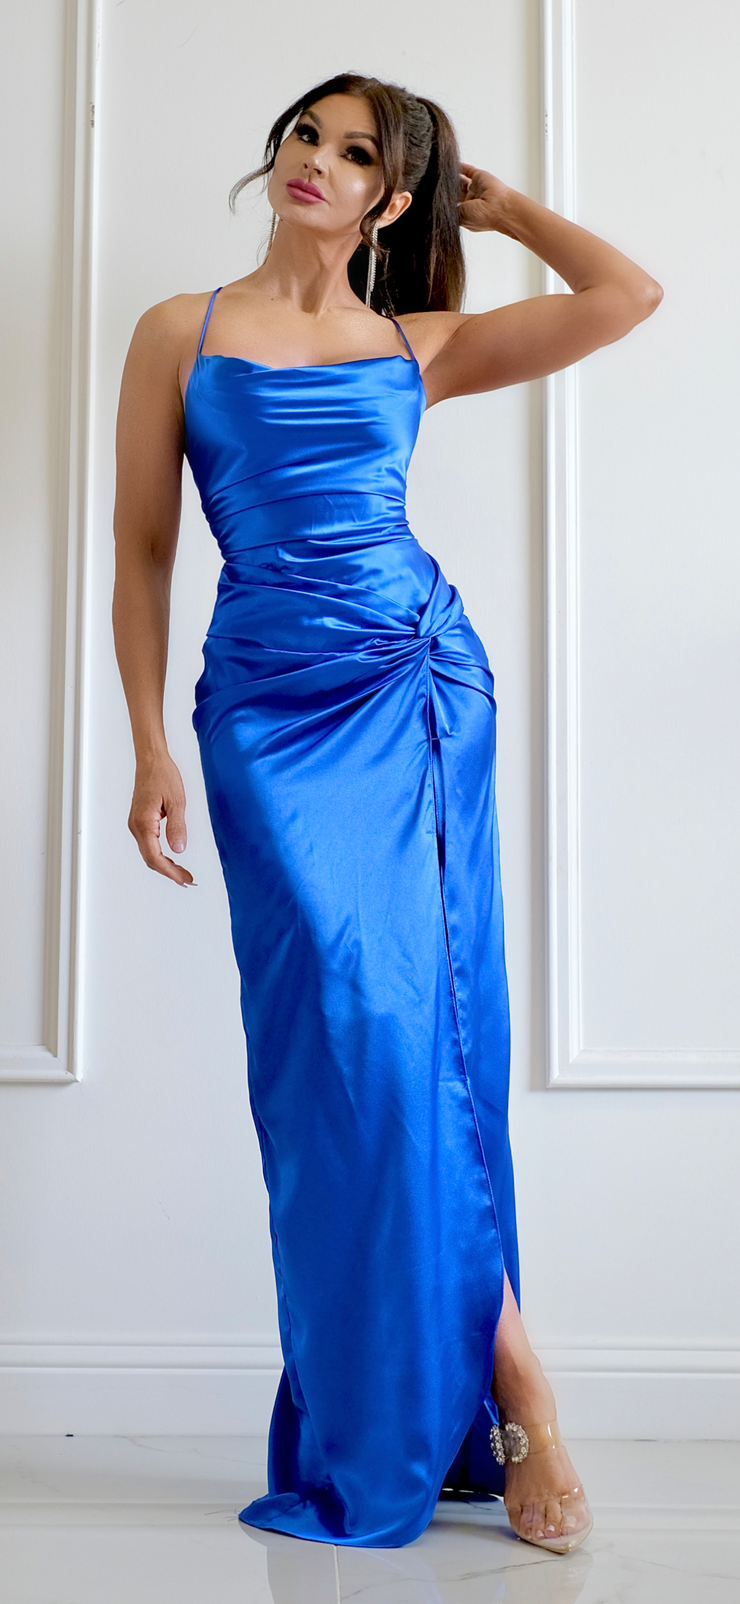 The Hailey Royal Blue Satin Front Twist Formal